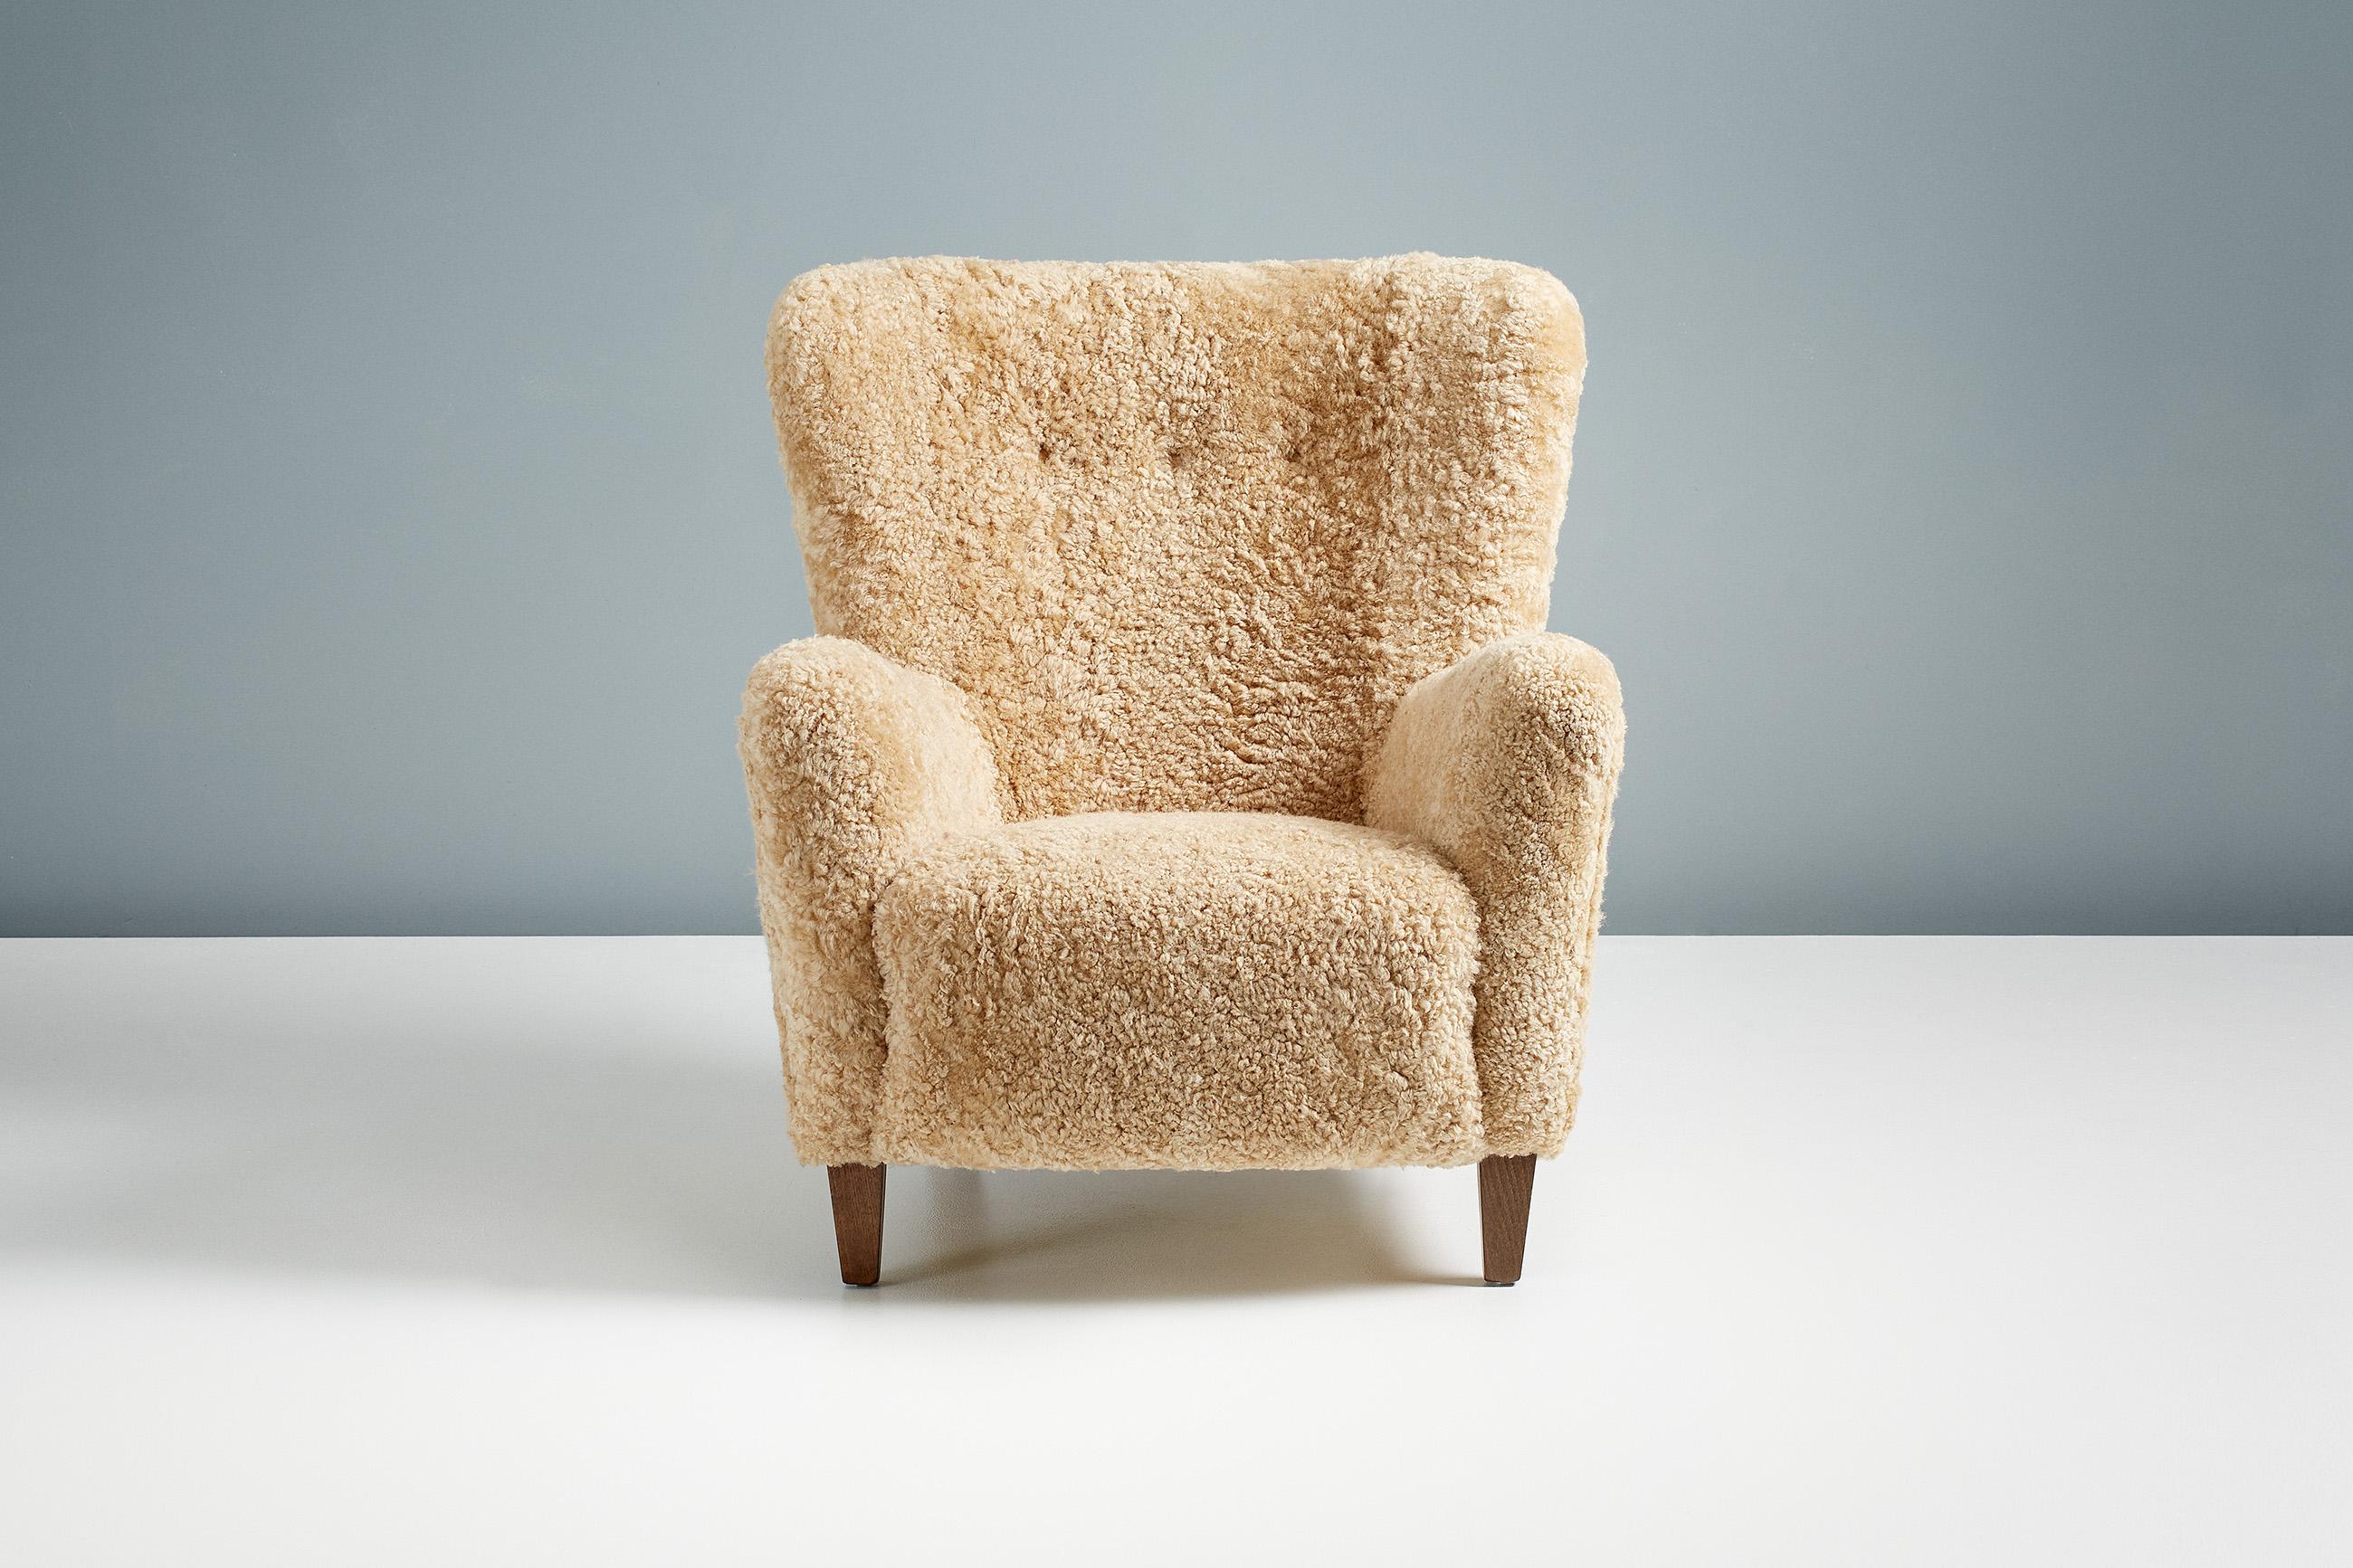 Dagmar Design

Ryo lounge chairs

A pair of custom made lounge chairs developed and produced at our workshops in London using the highest quality materials. These examples are upholstered in luxurious 'Moonlight' Australian sheepskin. The Ryo chair